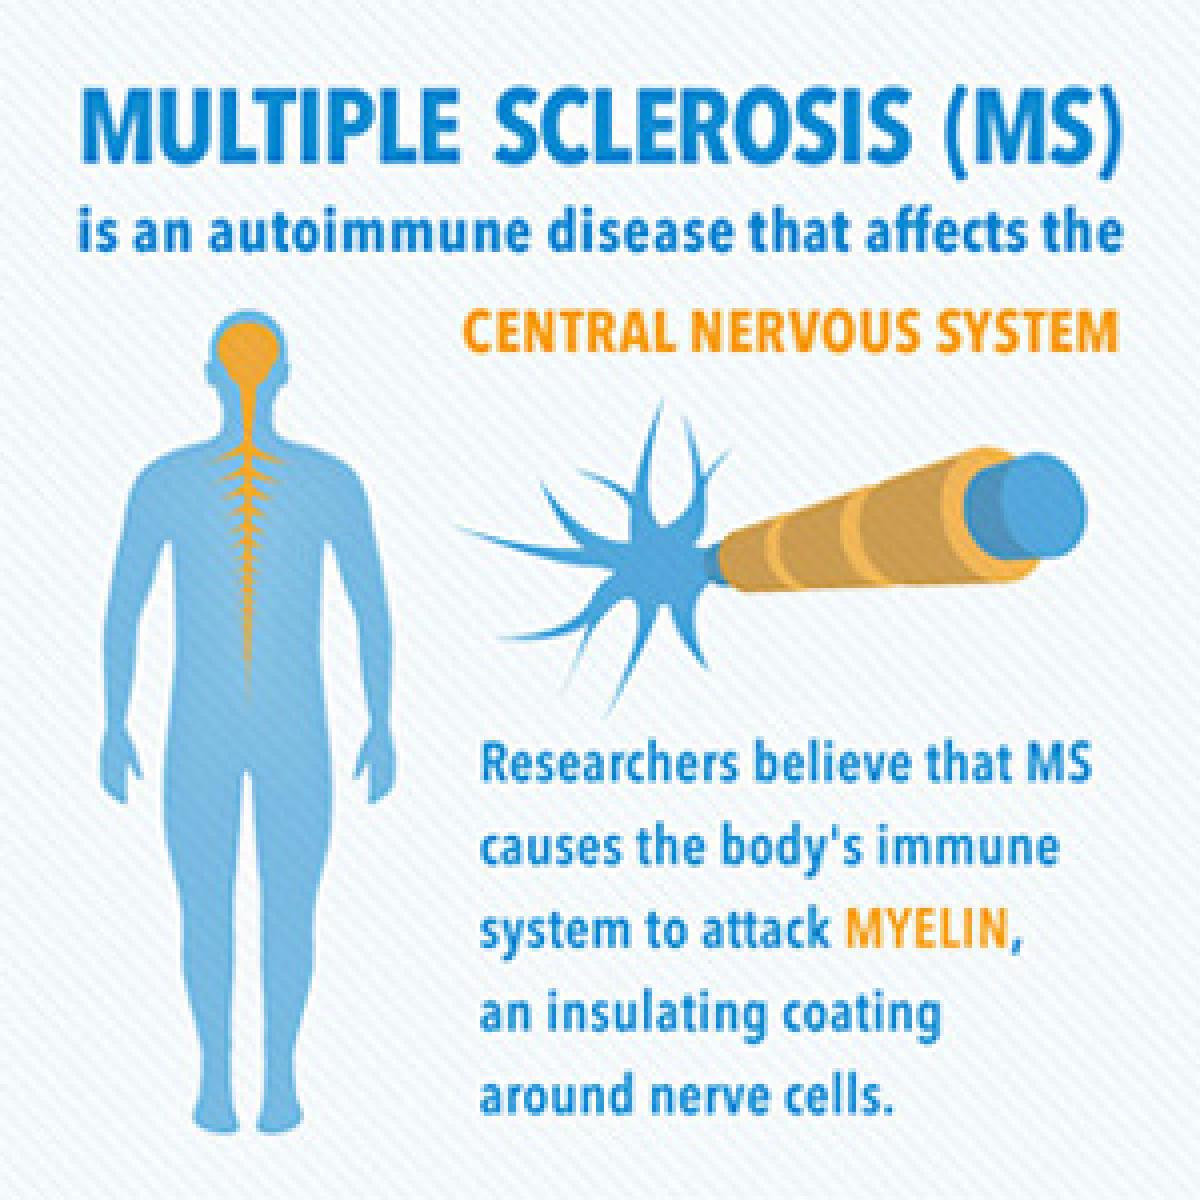 What is Multiple sclerosis (MS)?